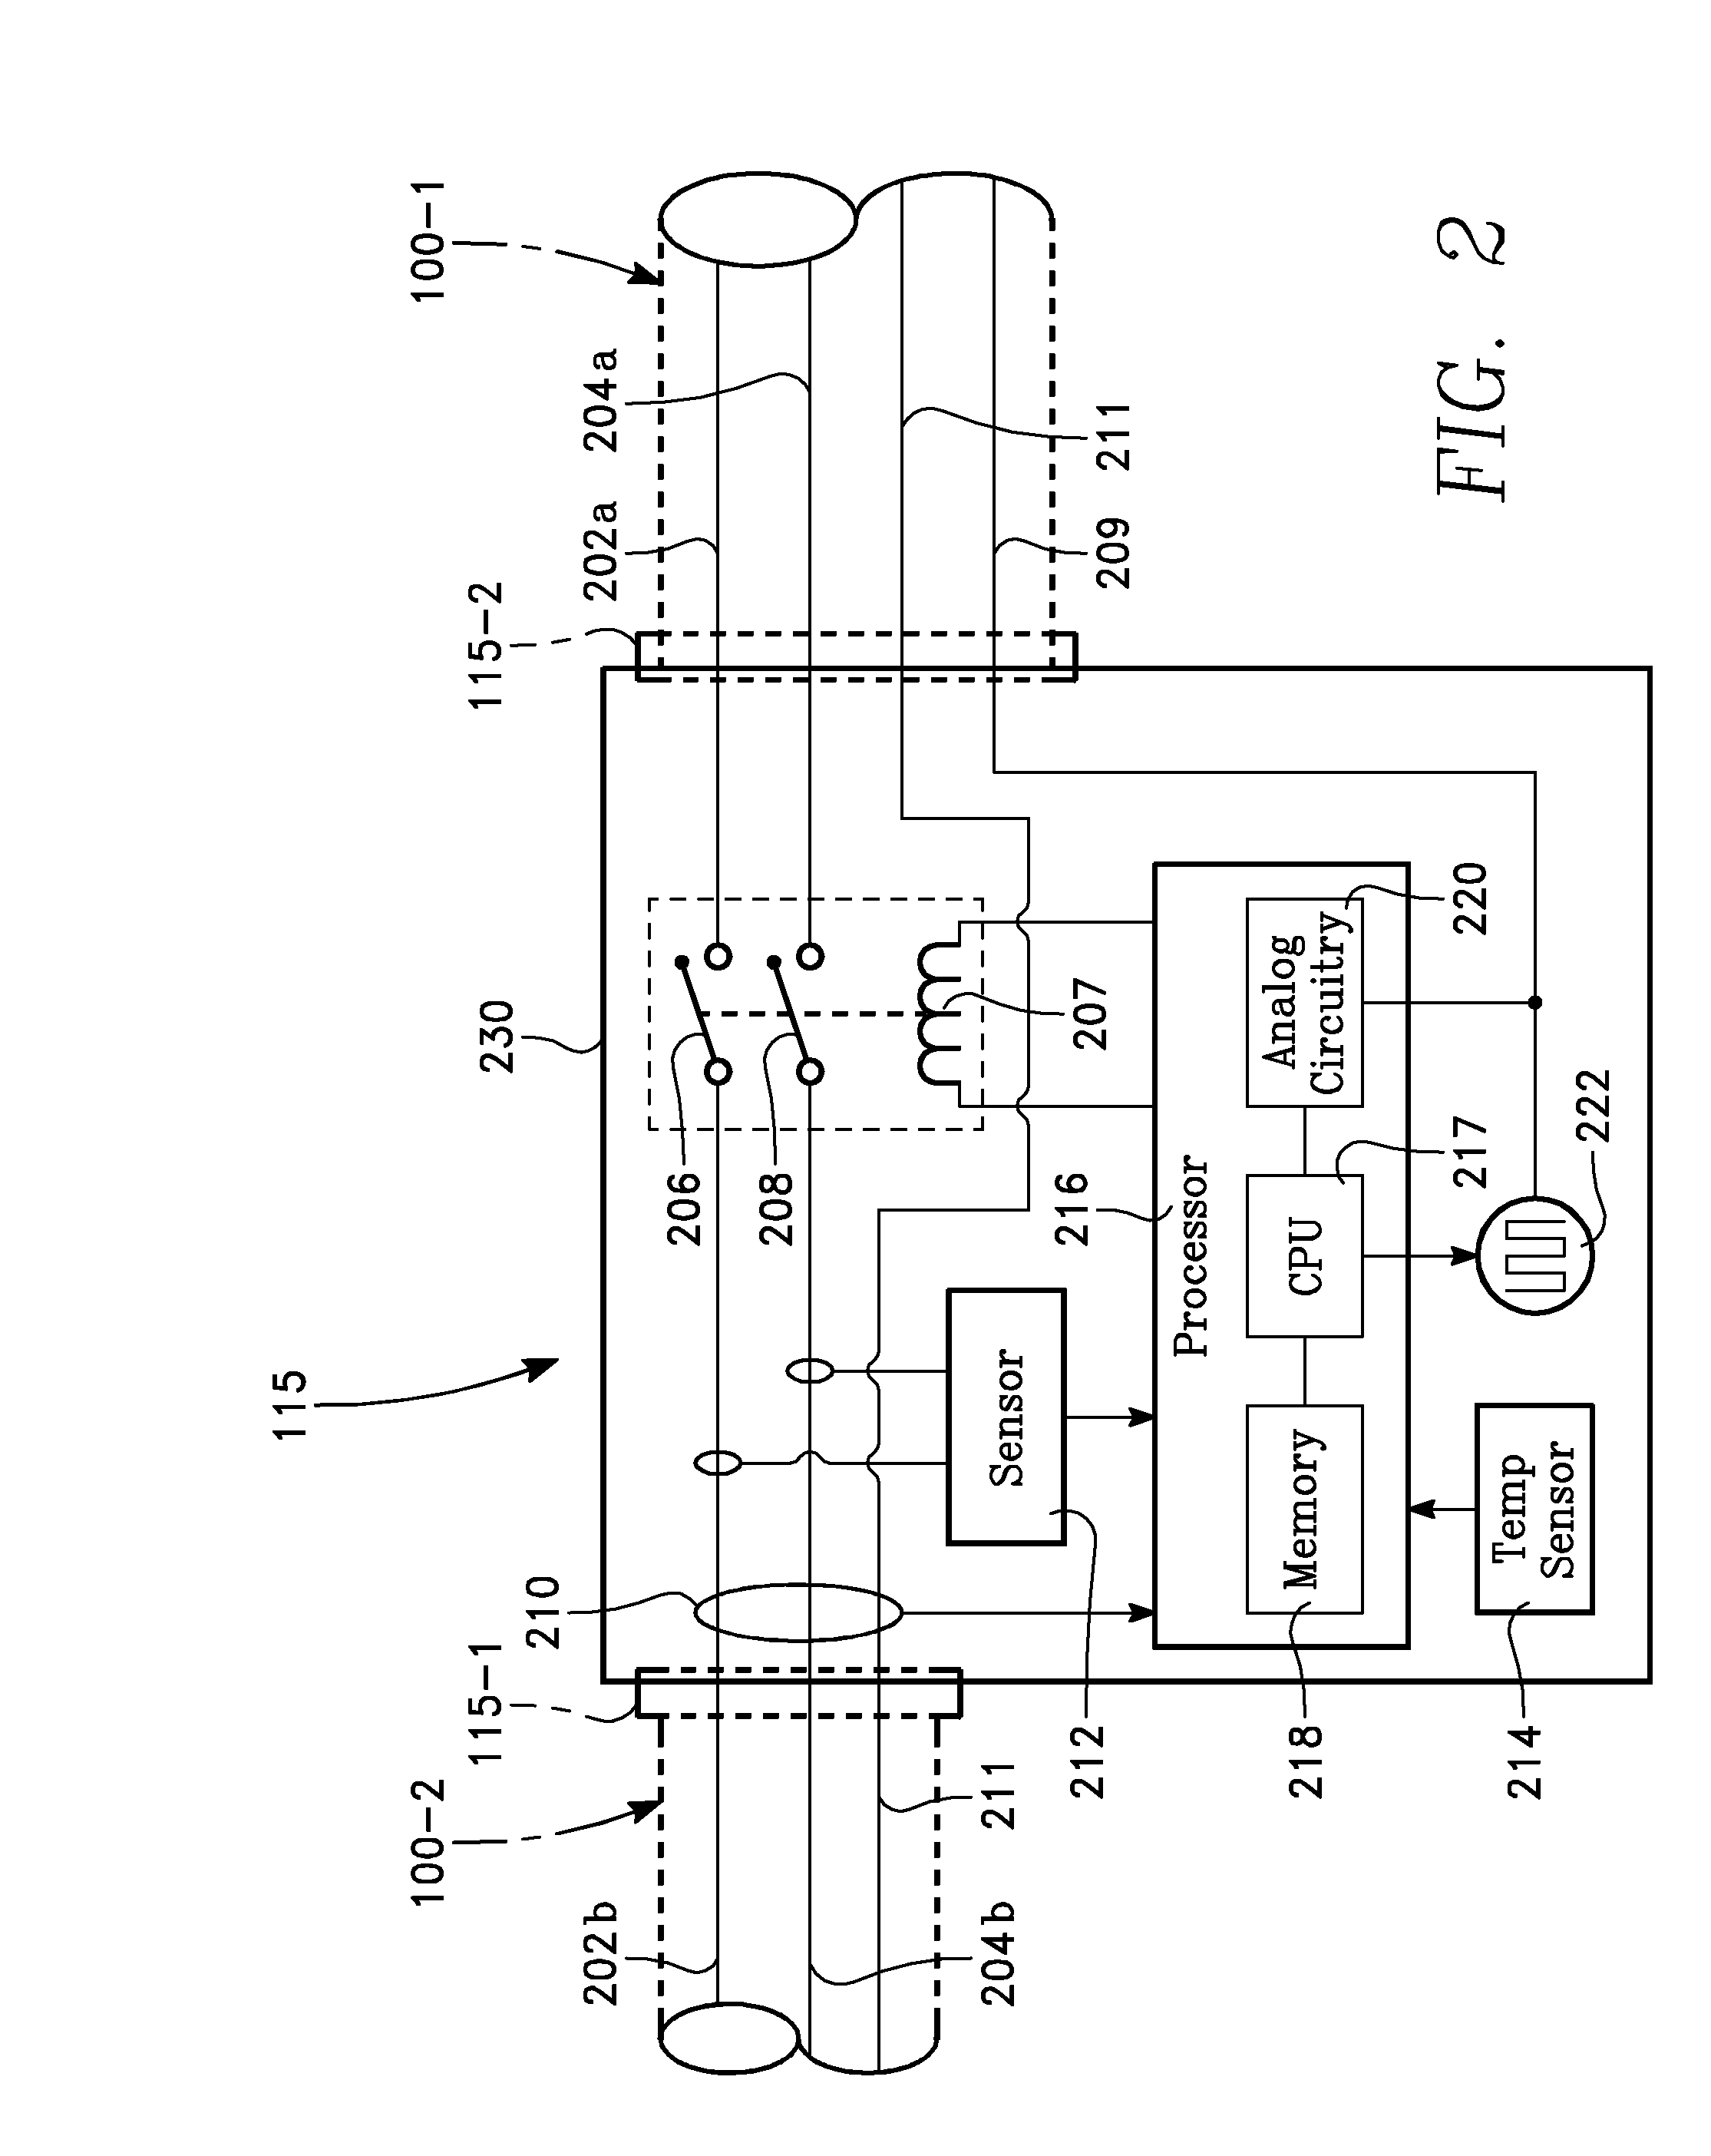 Electric vehicle supply equipment with temperature controlled current